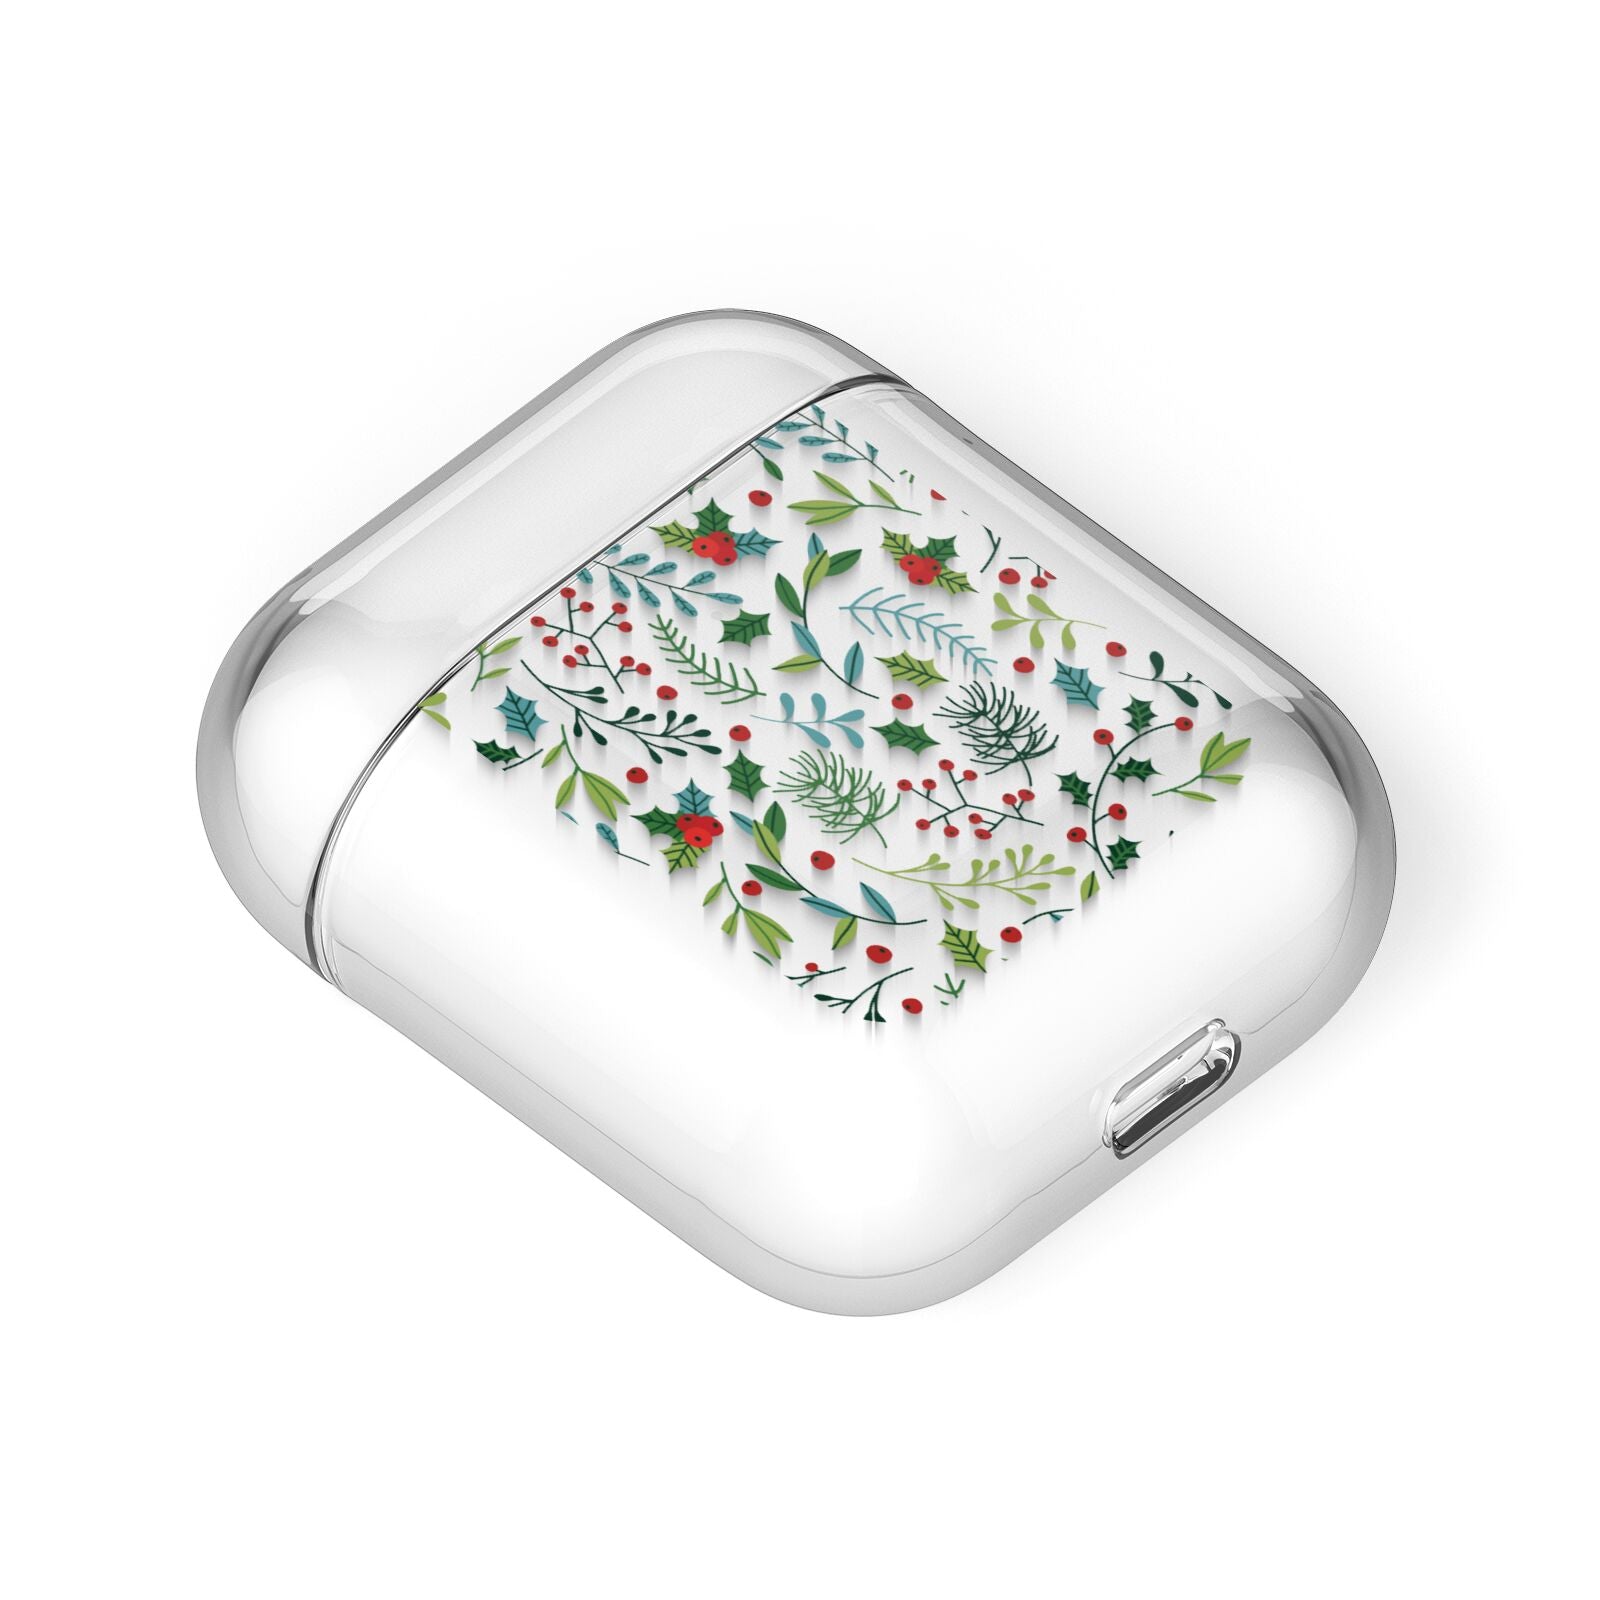 Winter Floral AirPods Case Laid Flat